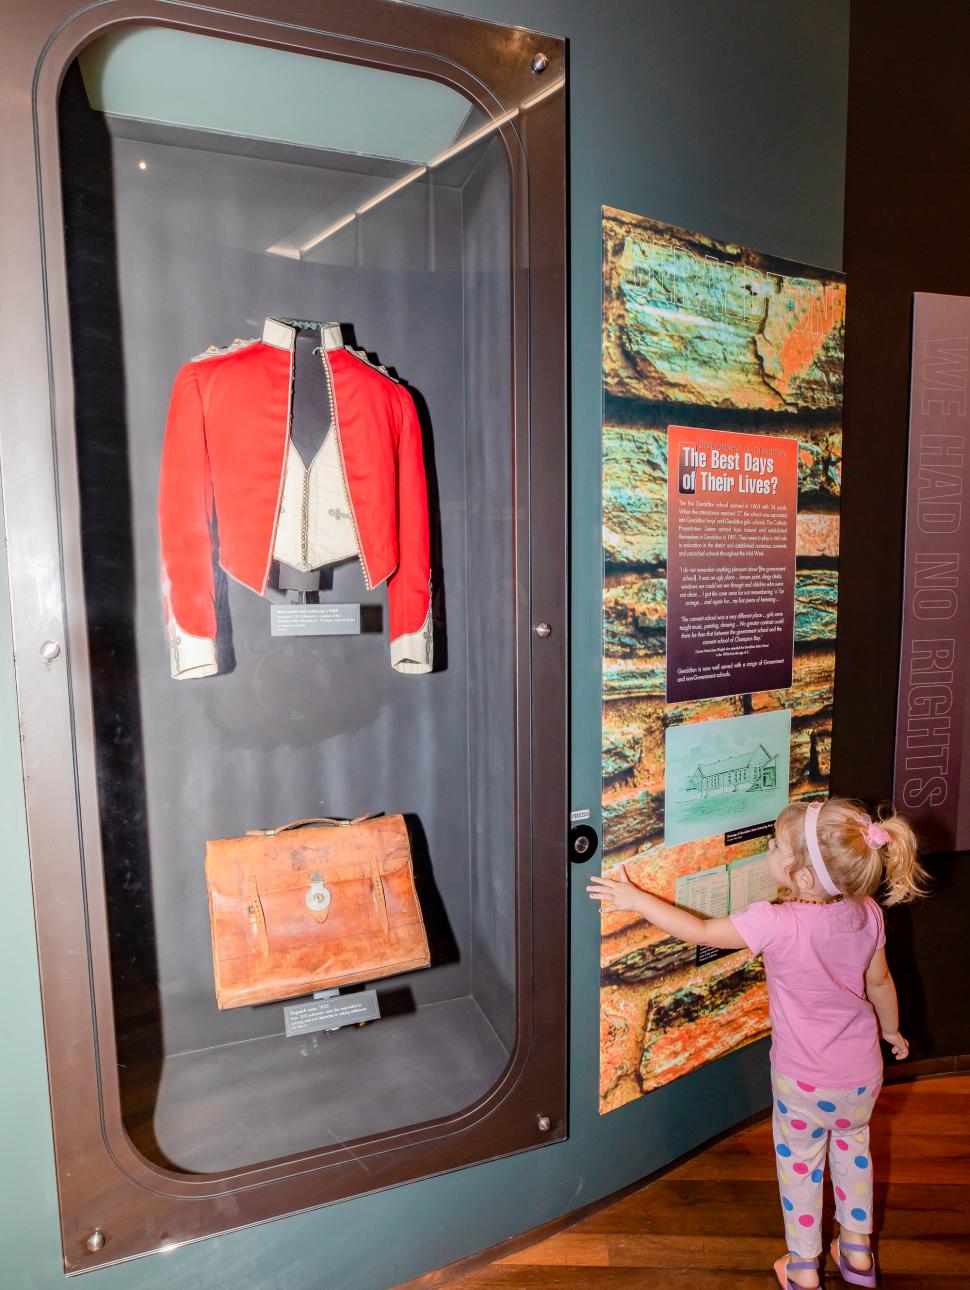 A young girl examines a museum showcase containing an old jacket and bag